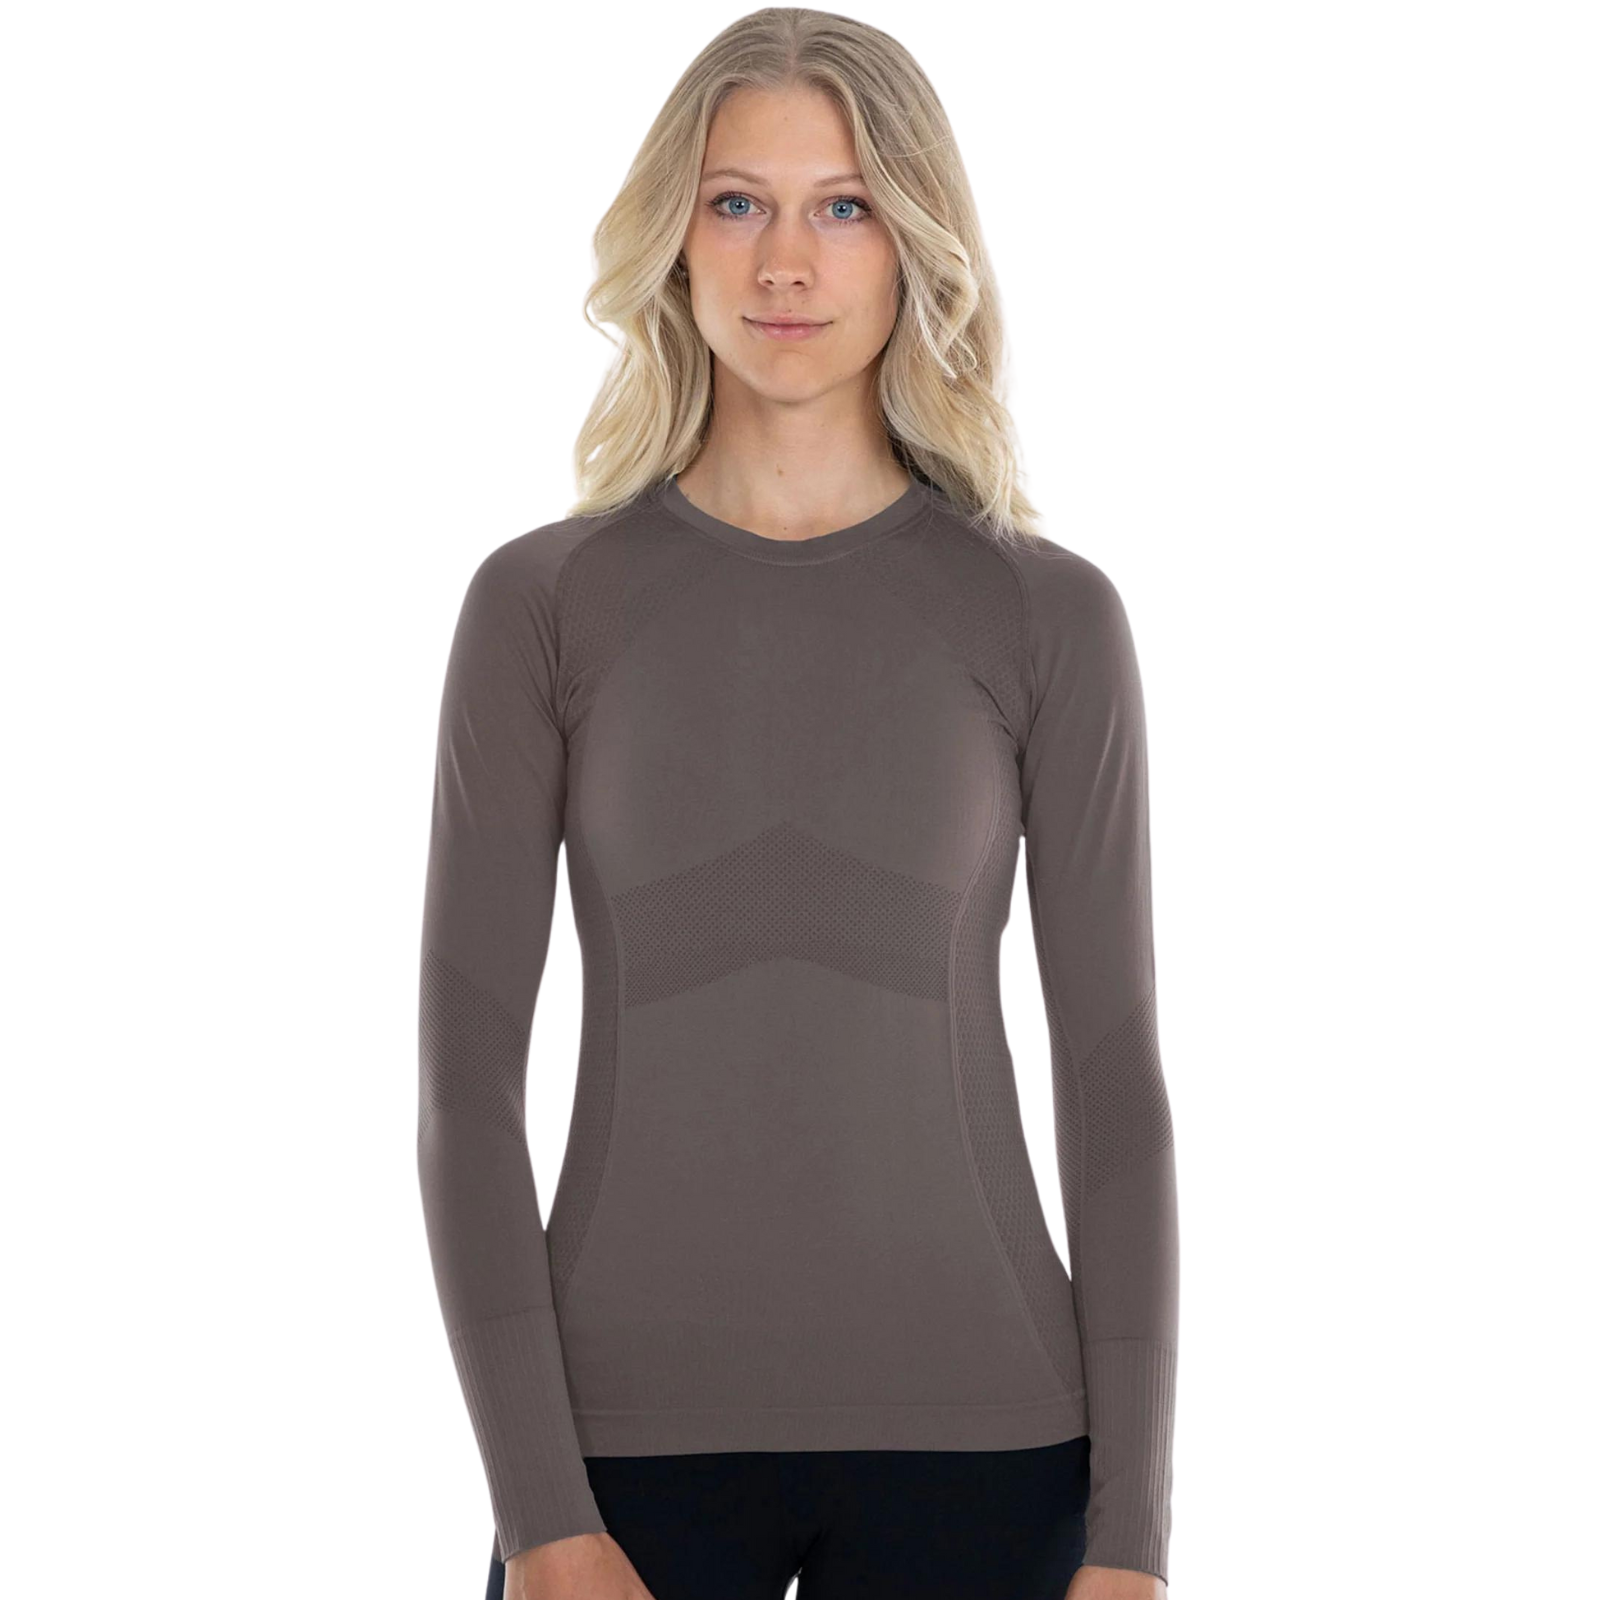 Anique Long Sleeve Crew Shirt in Fossil - Women&#39;s Small (4-6)